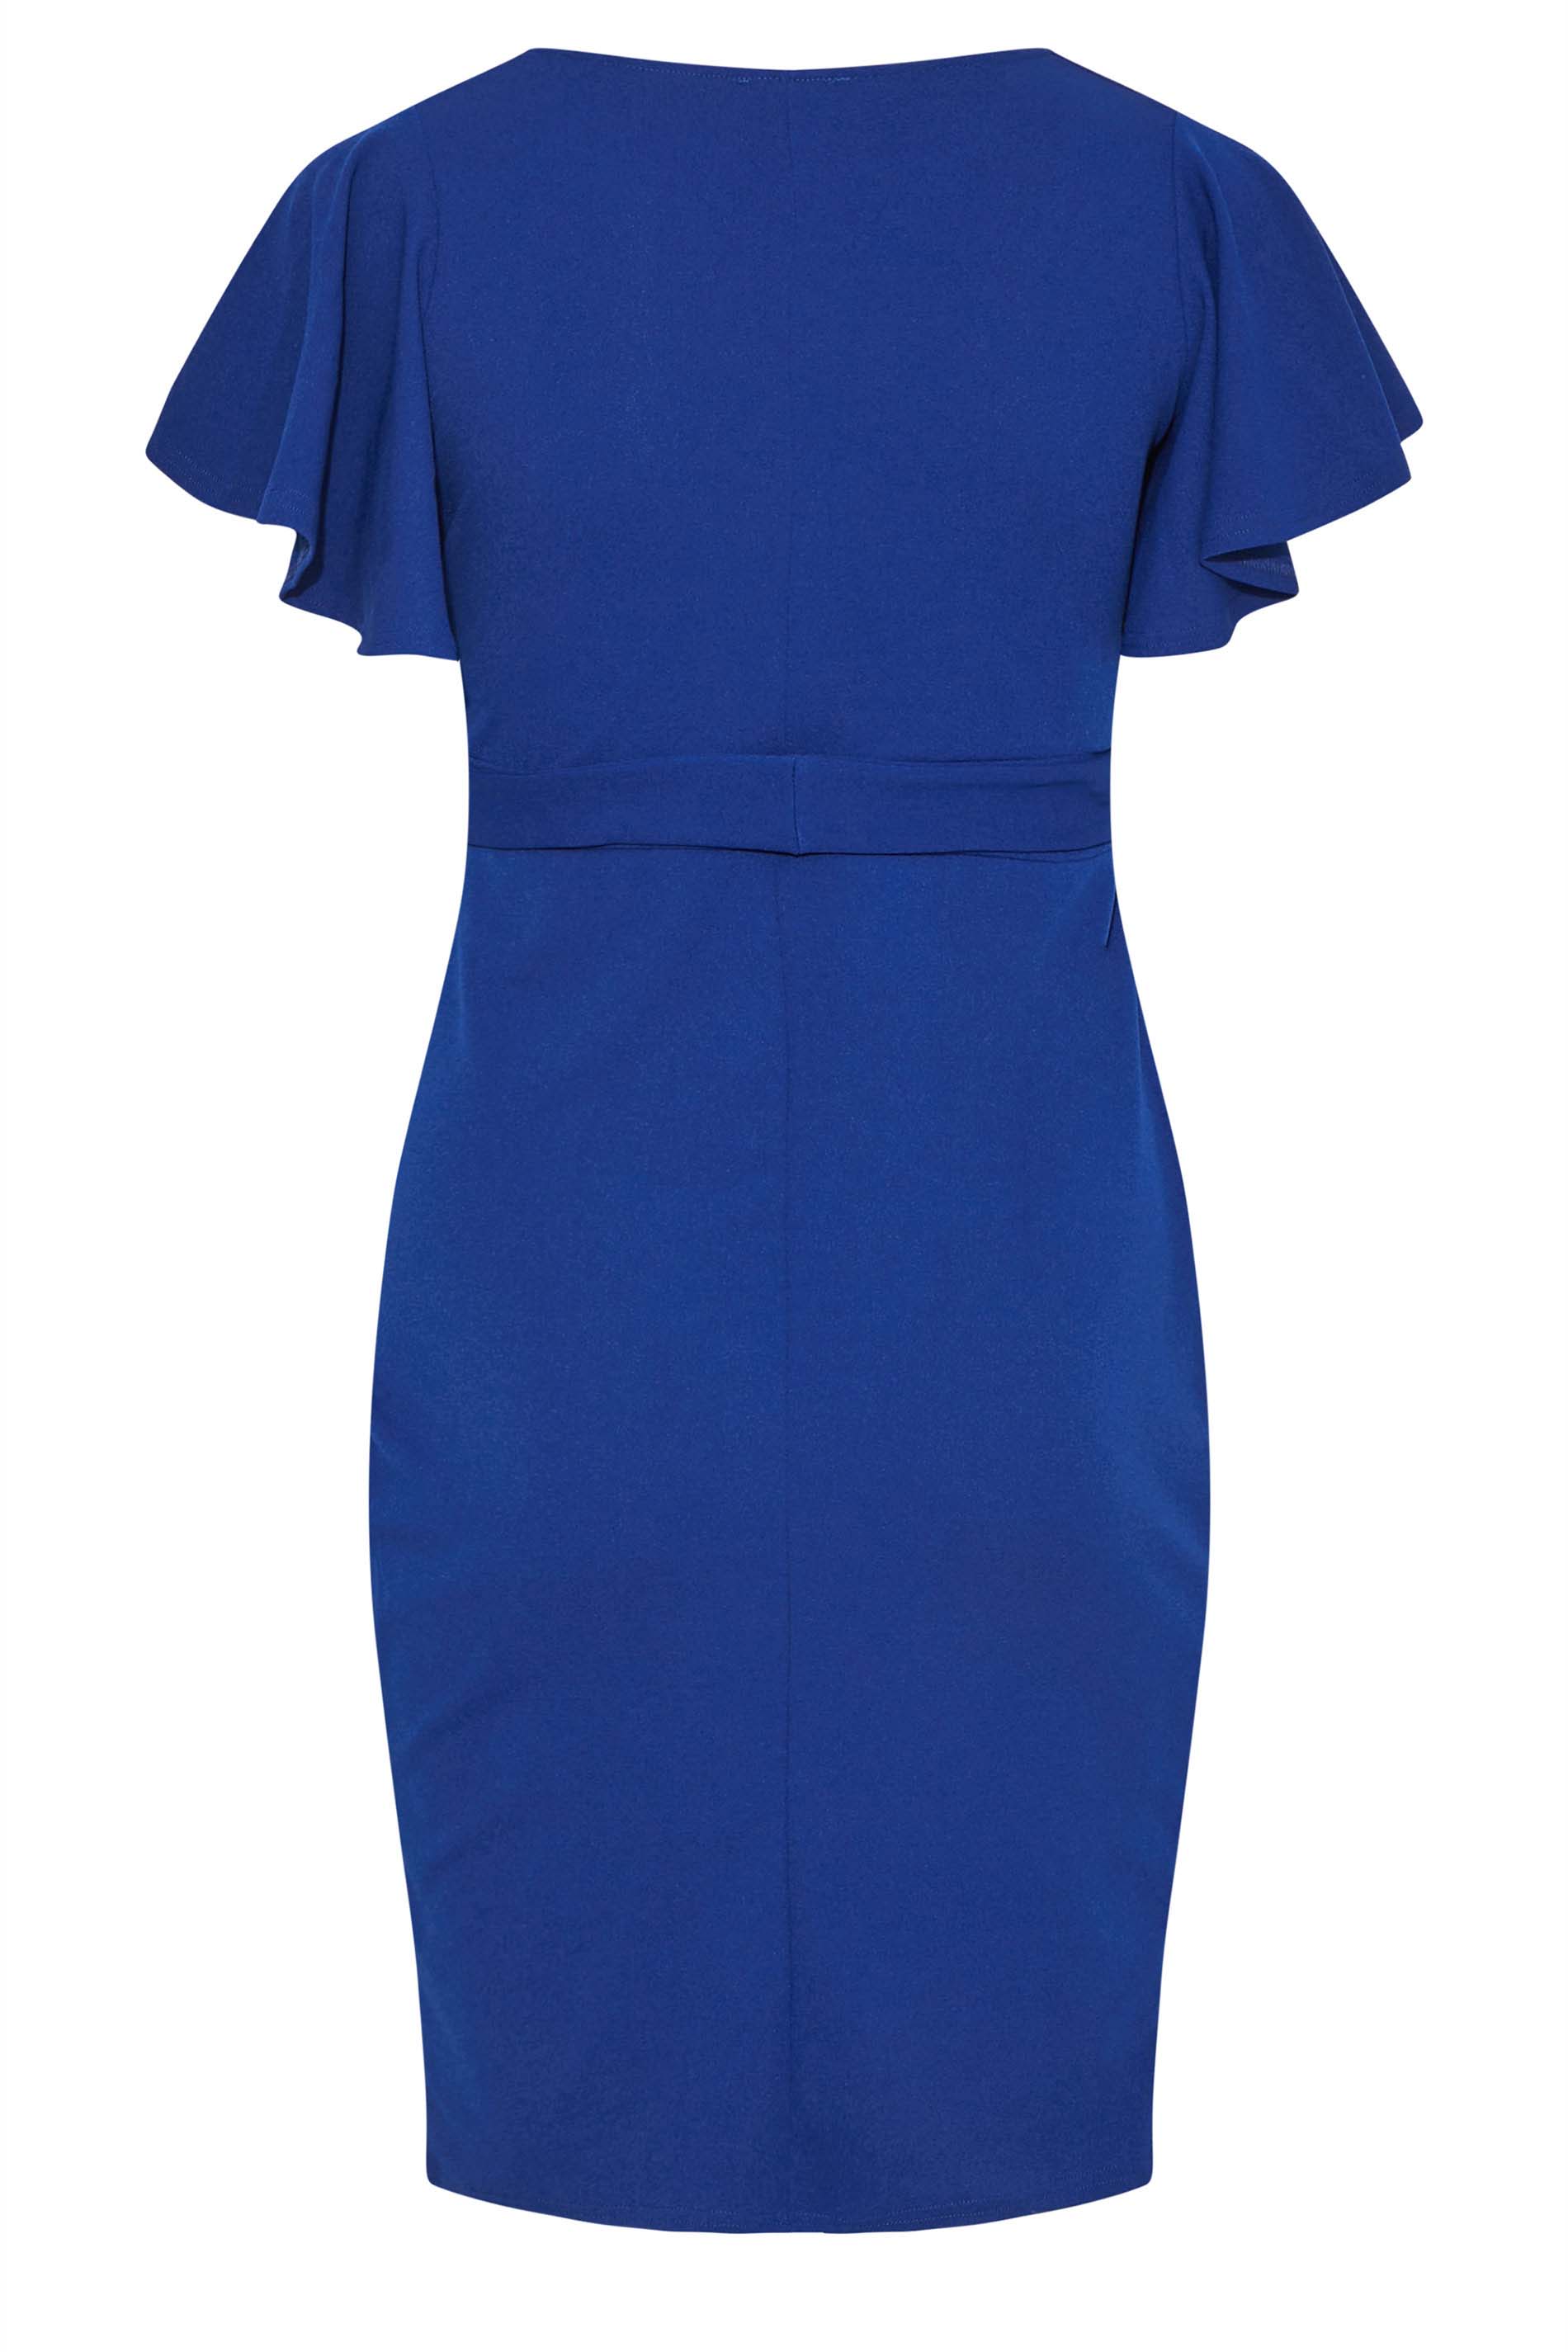 Robes Grande Taille Grande taille  Robes de Sorties | YOURS LONDON Curve Blue Buckle Wrap Bodycon Dress - LU01761